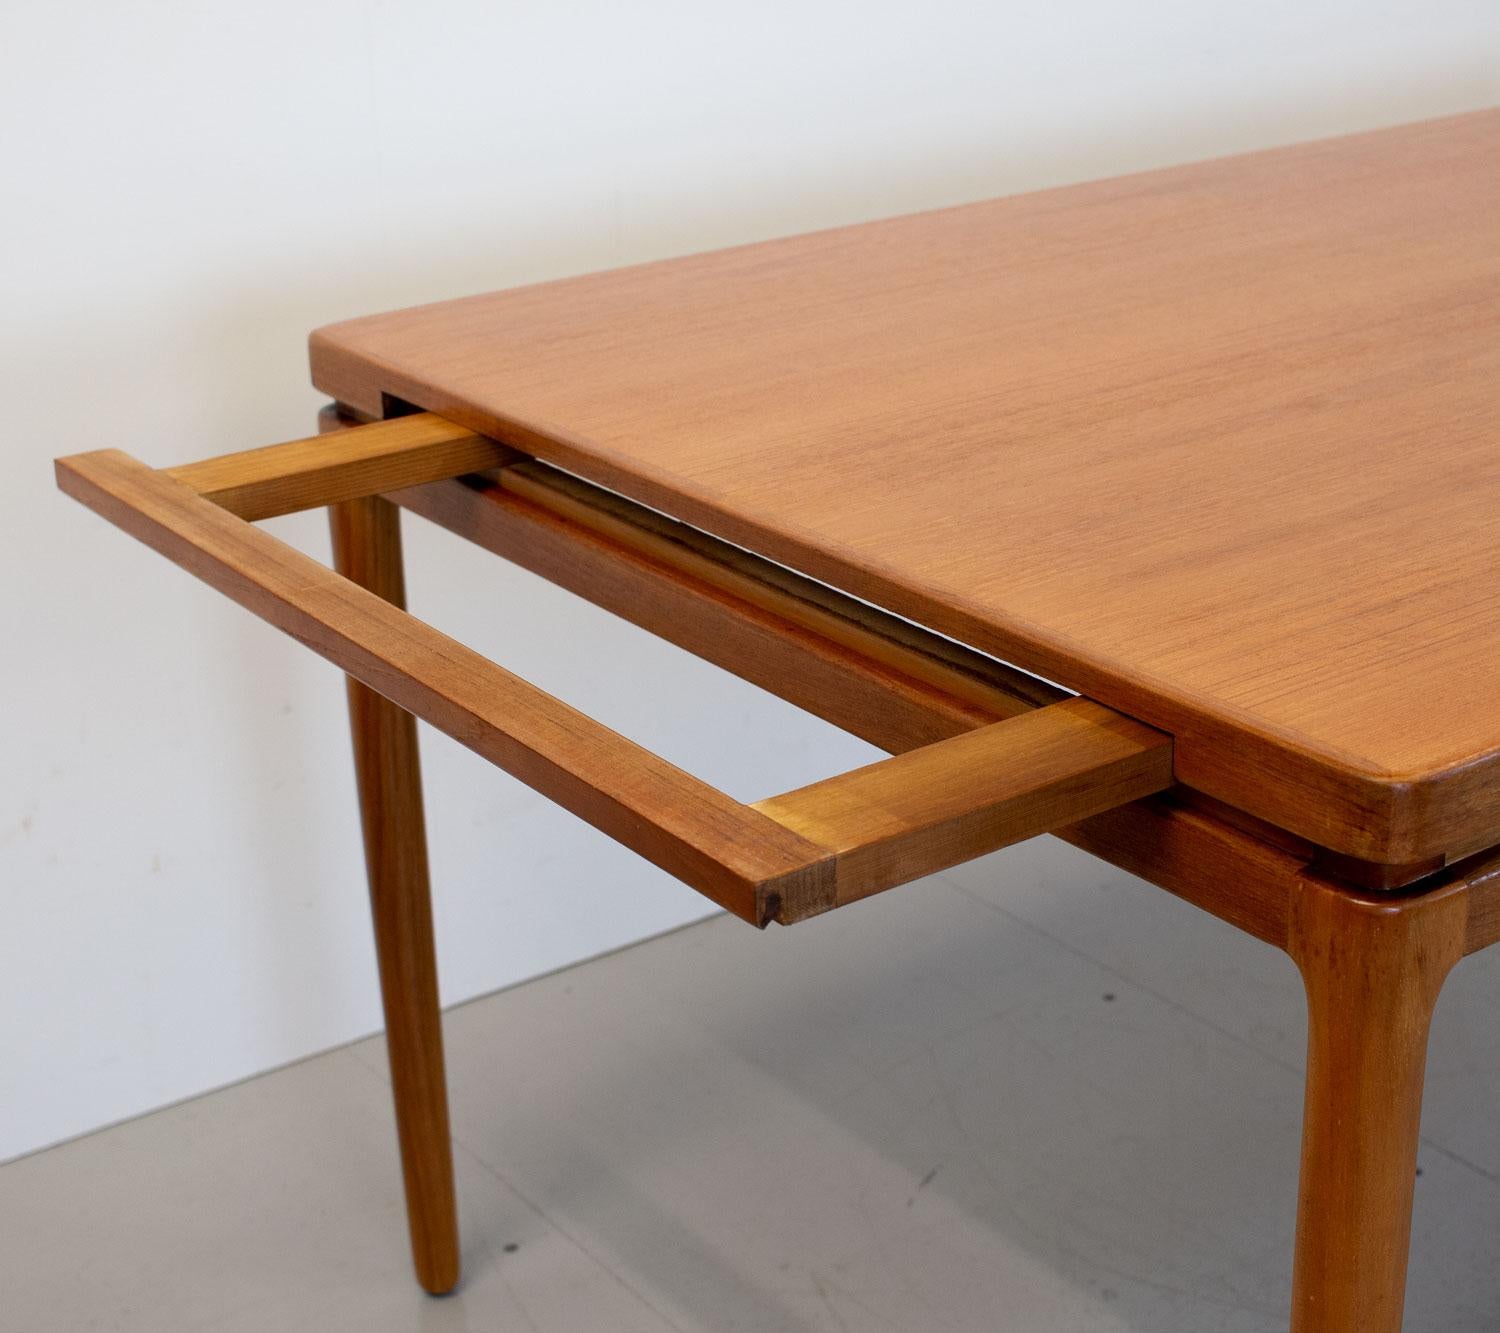 Danish teak extending dining table designed by Johannes Andersen for Christian Linneberg in the 1960s. This large table has superb design and construction with edge banding, surrounding rebate and hidden supports for the leaves that can take the